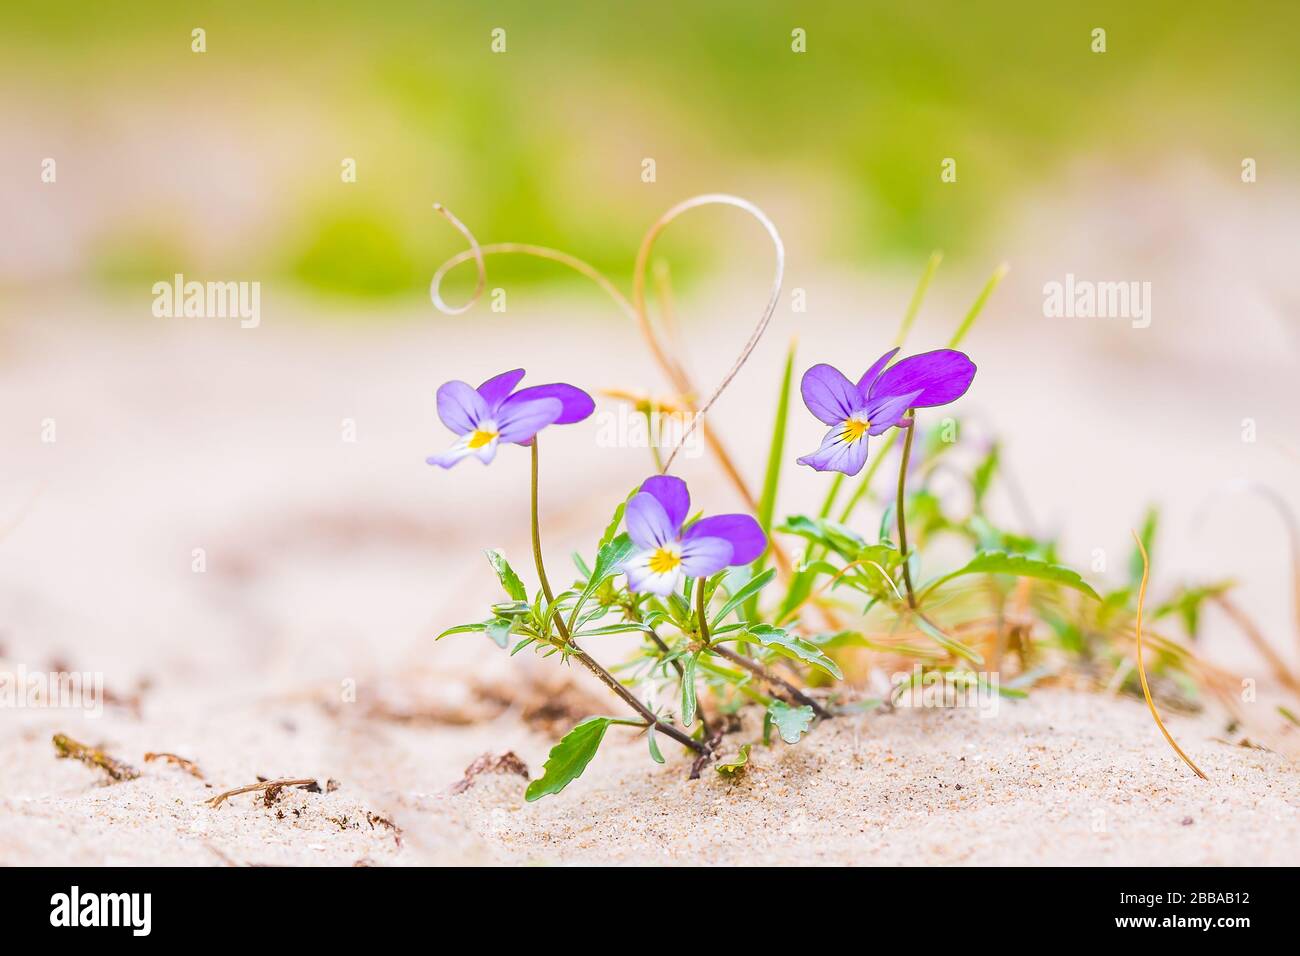 Viola tricolor curtisii rare wildflower, blooming in sand in the dunes. Coastal landscape bright sunlight Stock Photo